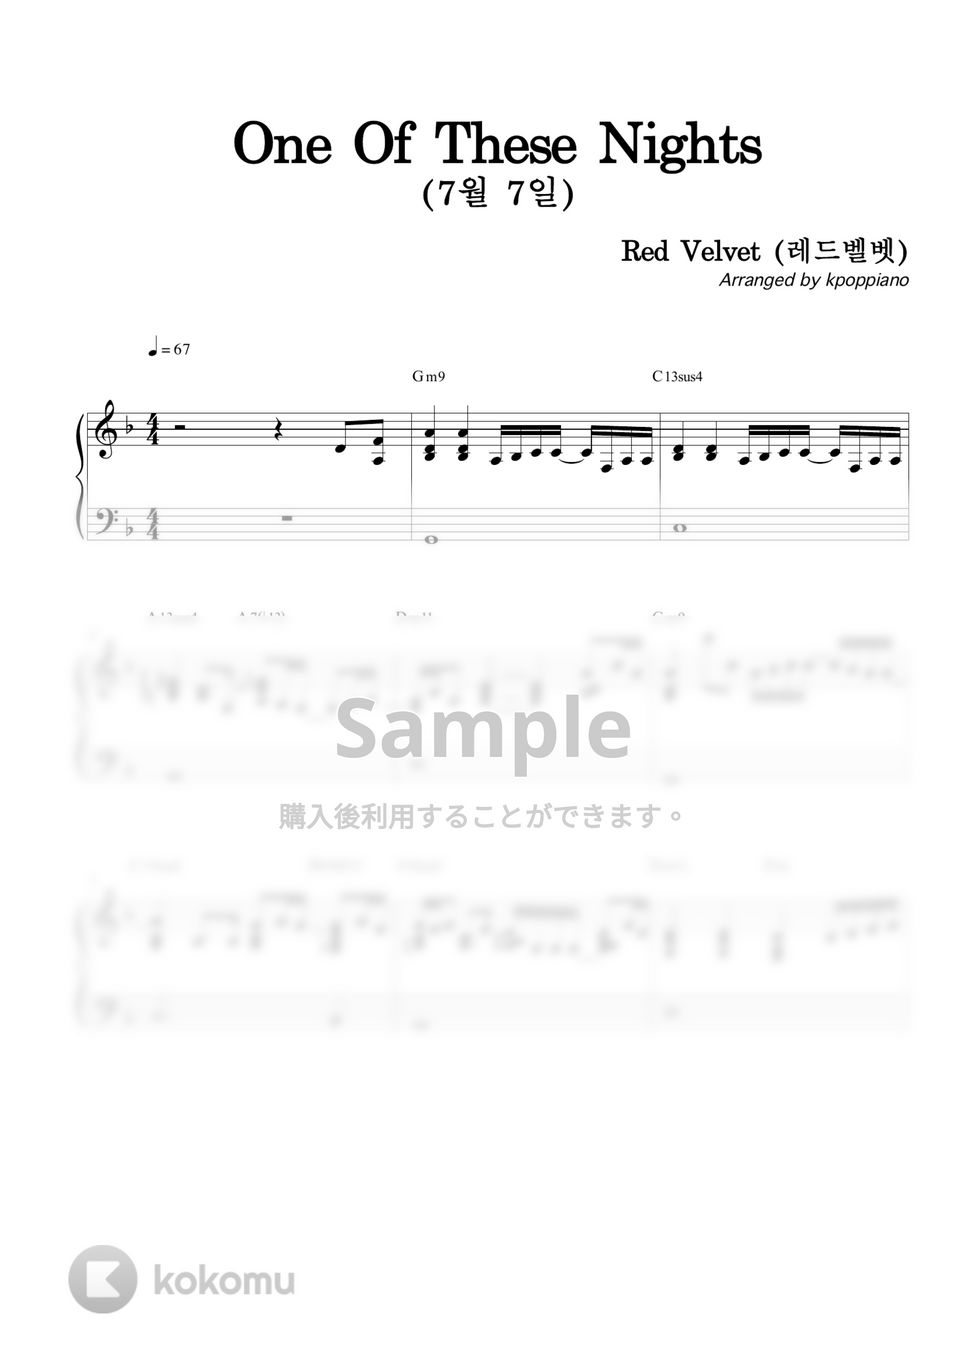 Red Velvet - 7月 7日 (One Of These Nights) by KPOP PIANO